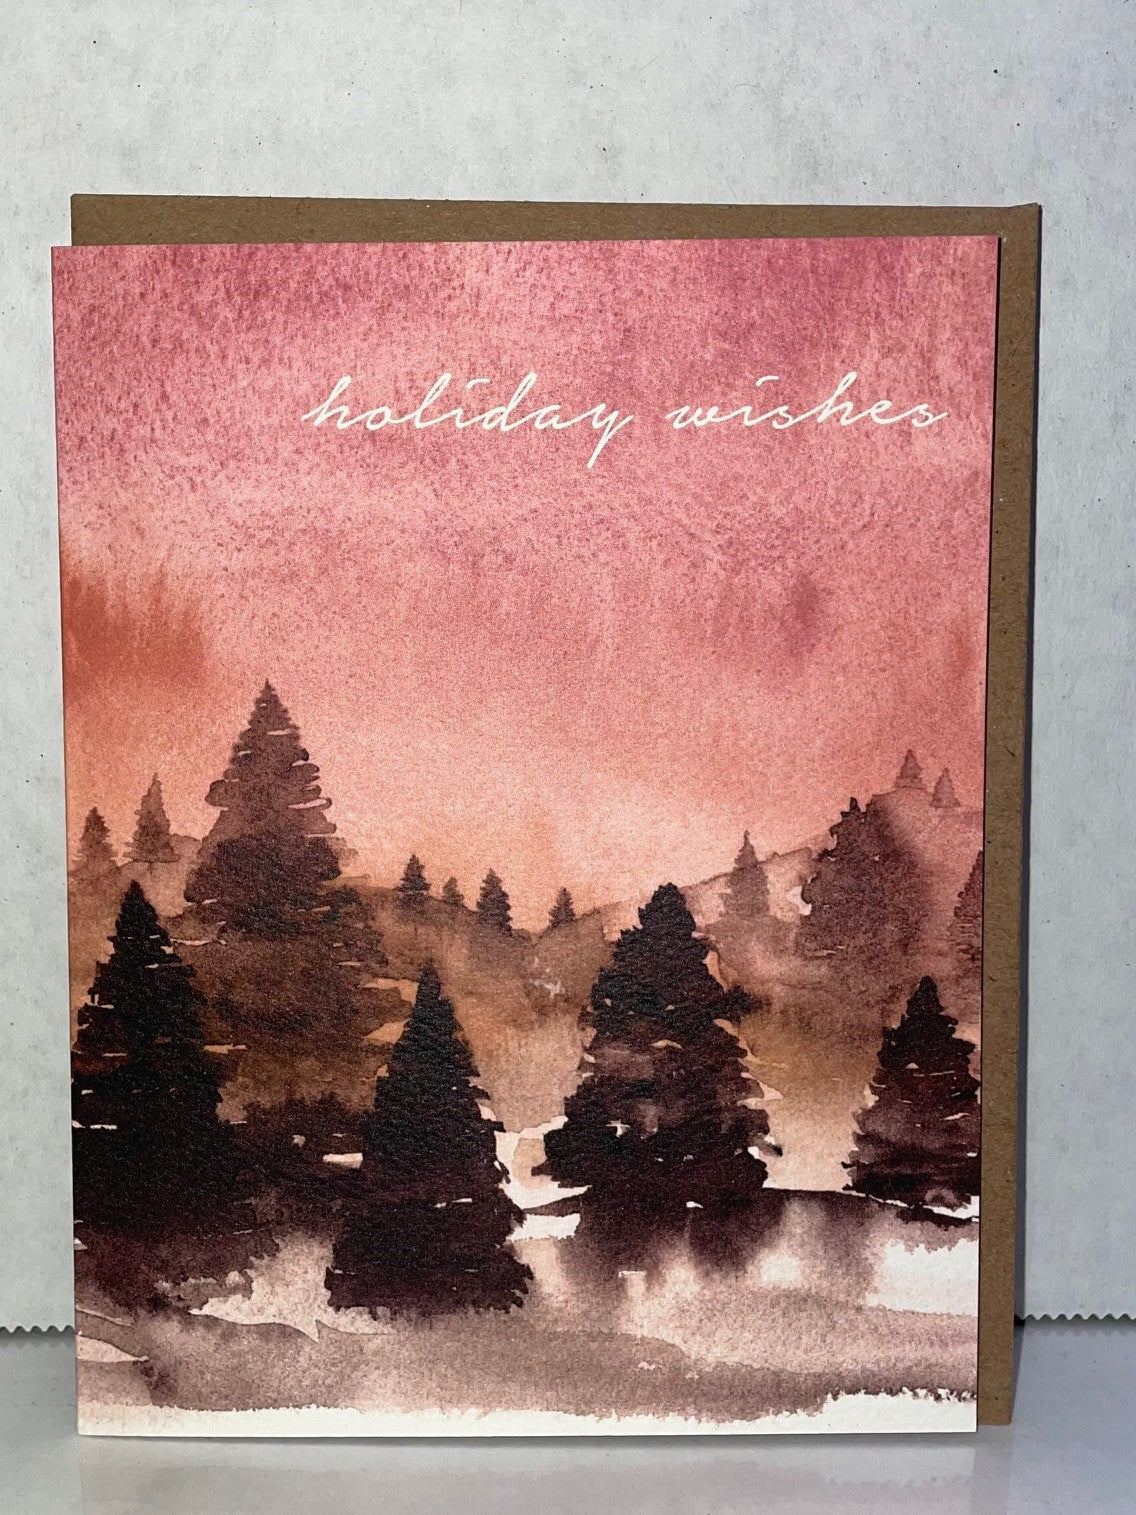 Holiday Wishes Card